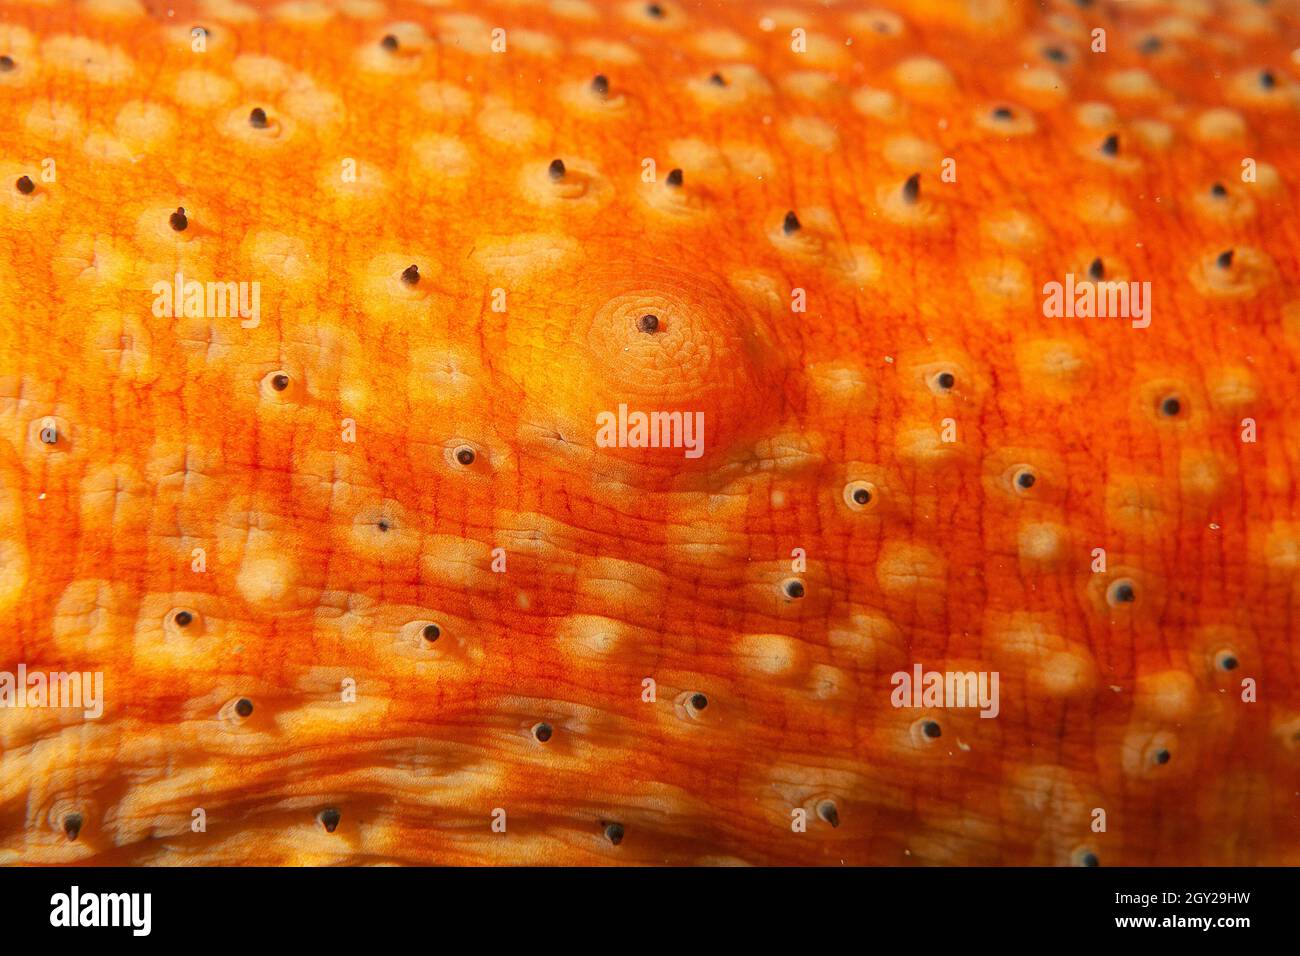 Skin detail of a warty sea cucumber, Apostichopus parvimensis, Point Lobos State Natural Reserve, California, USA Stock Photo